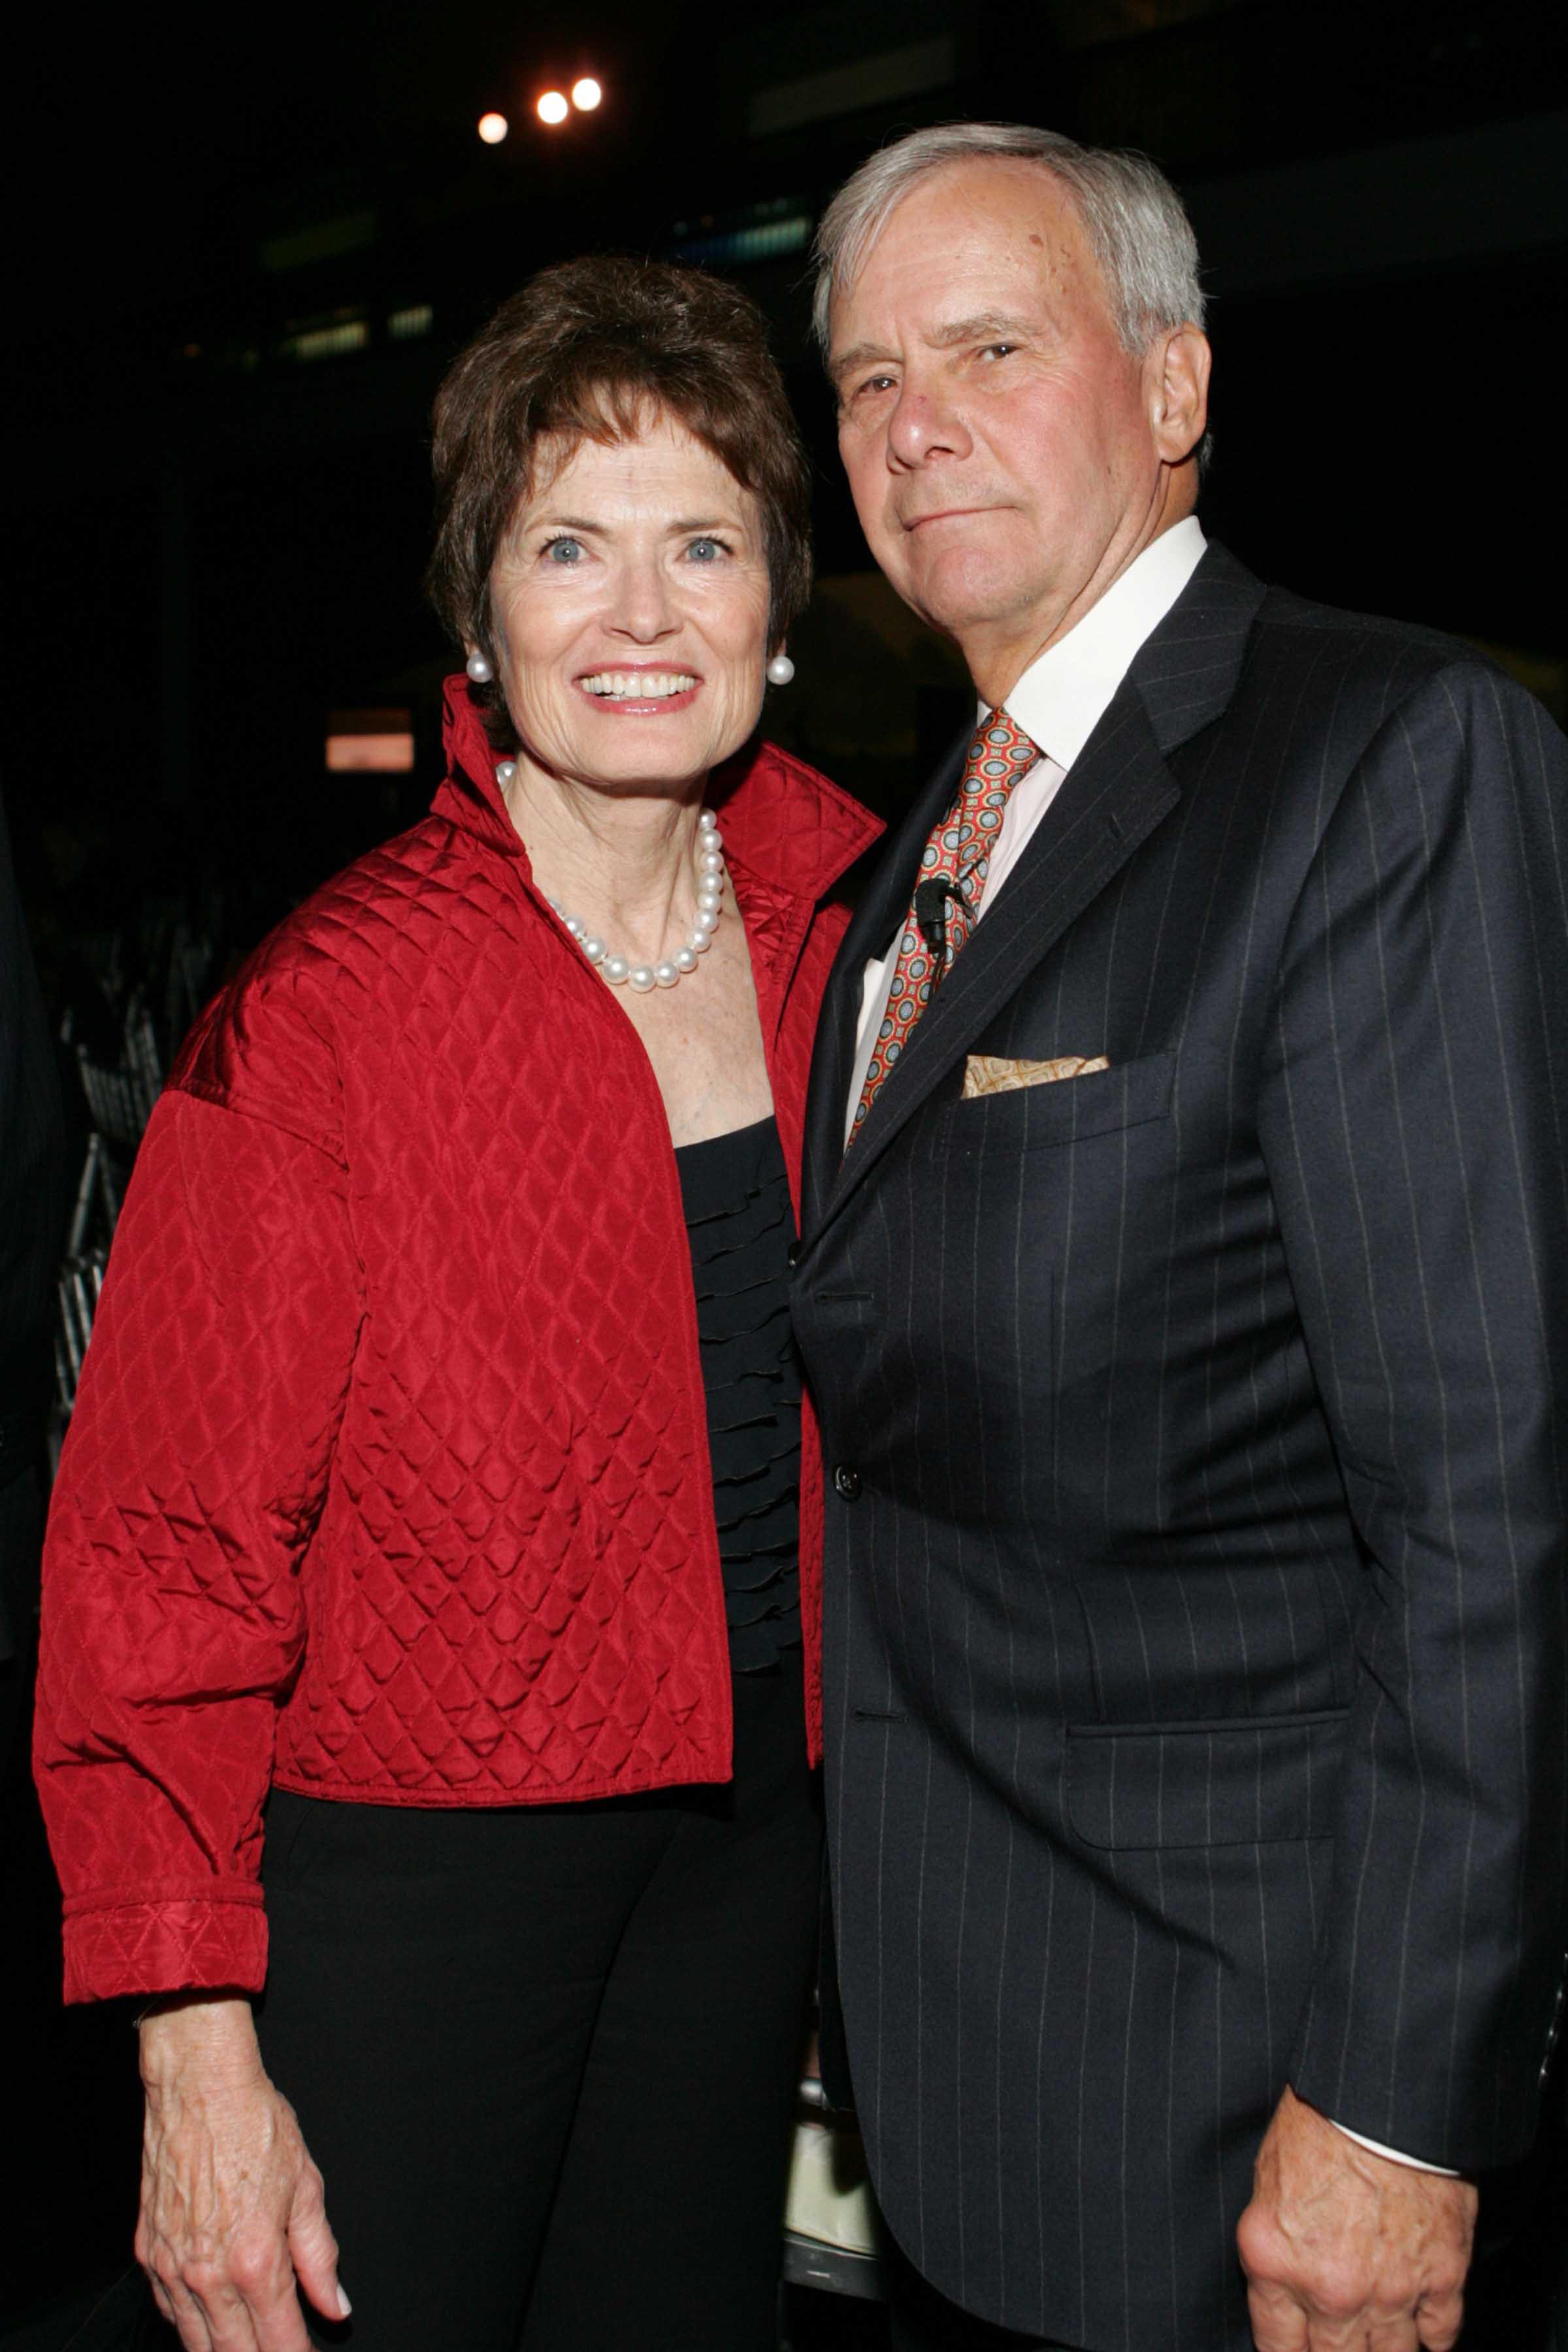 Meredith Auld and Tom Brokaw at Conservation International's 9th Annual New York Dinner on May 24, 2006, in New York City | Source: Getty Images